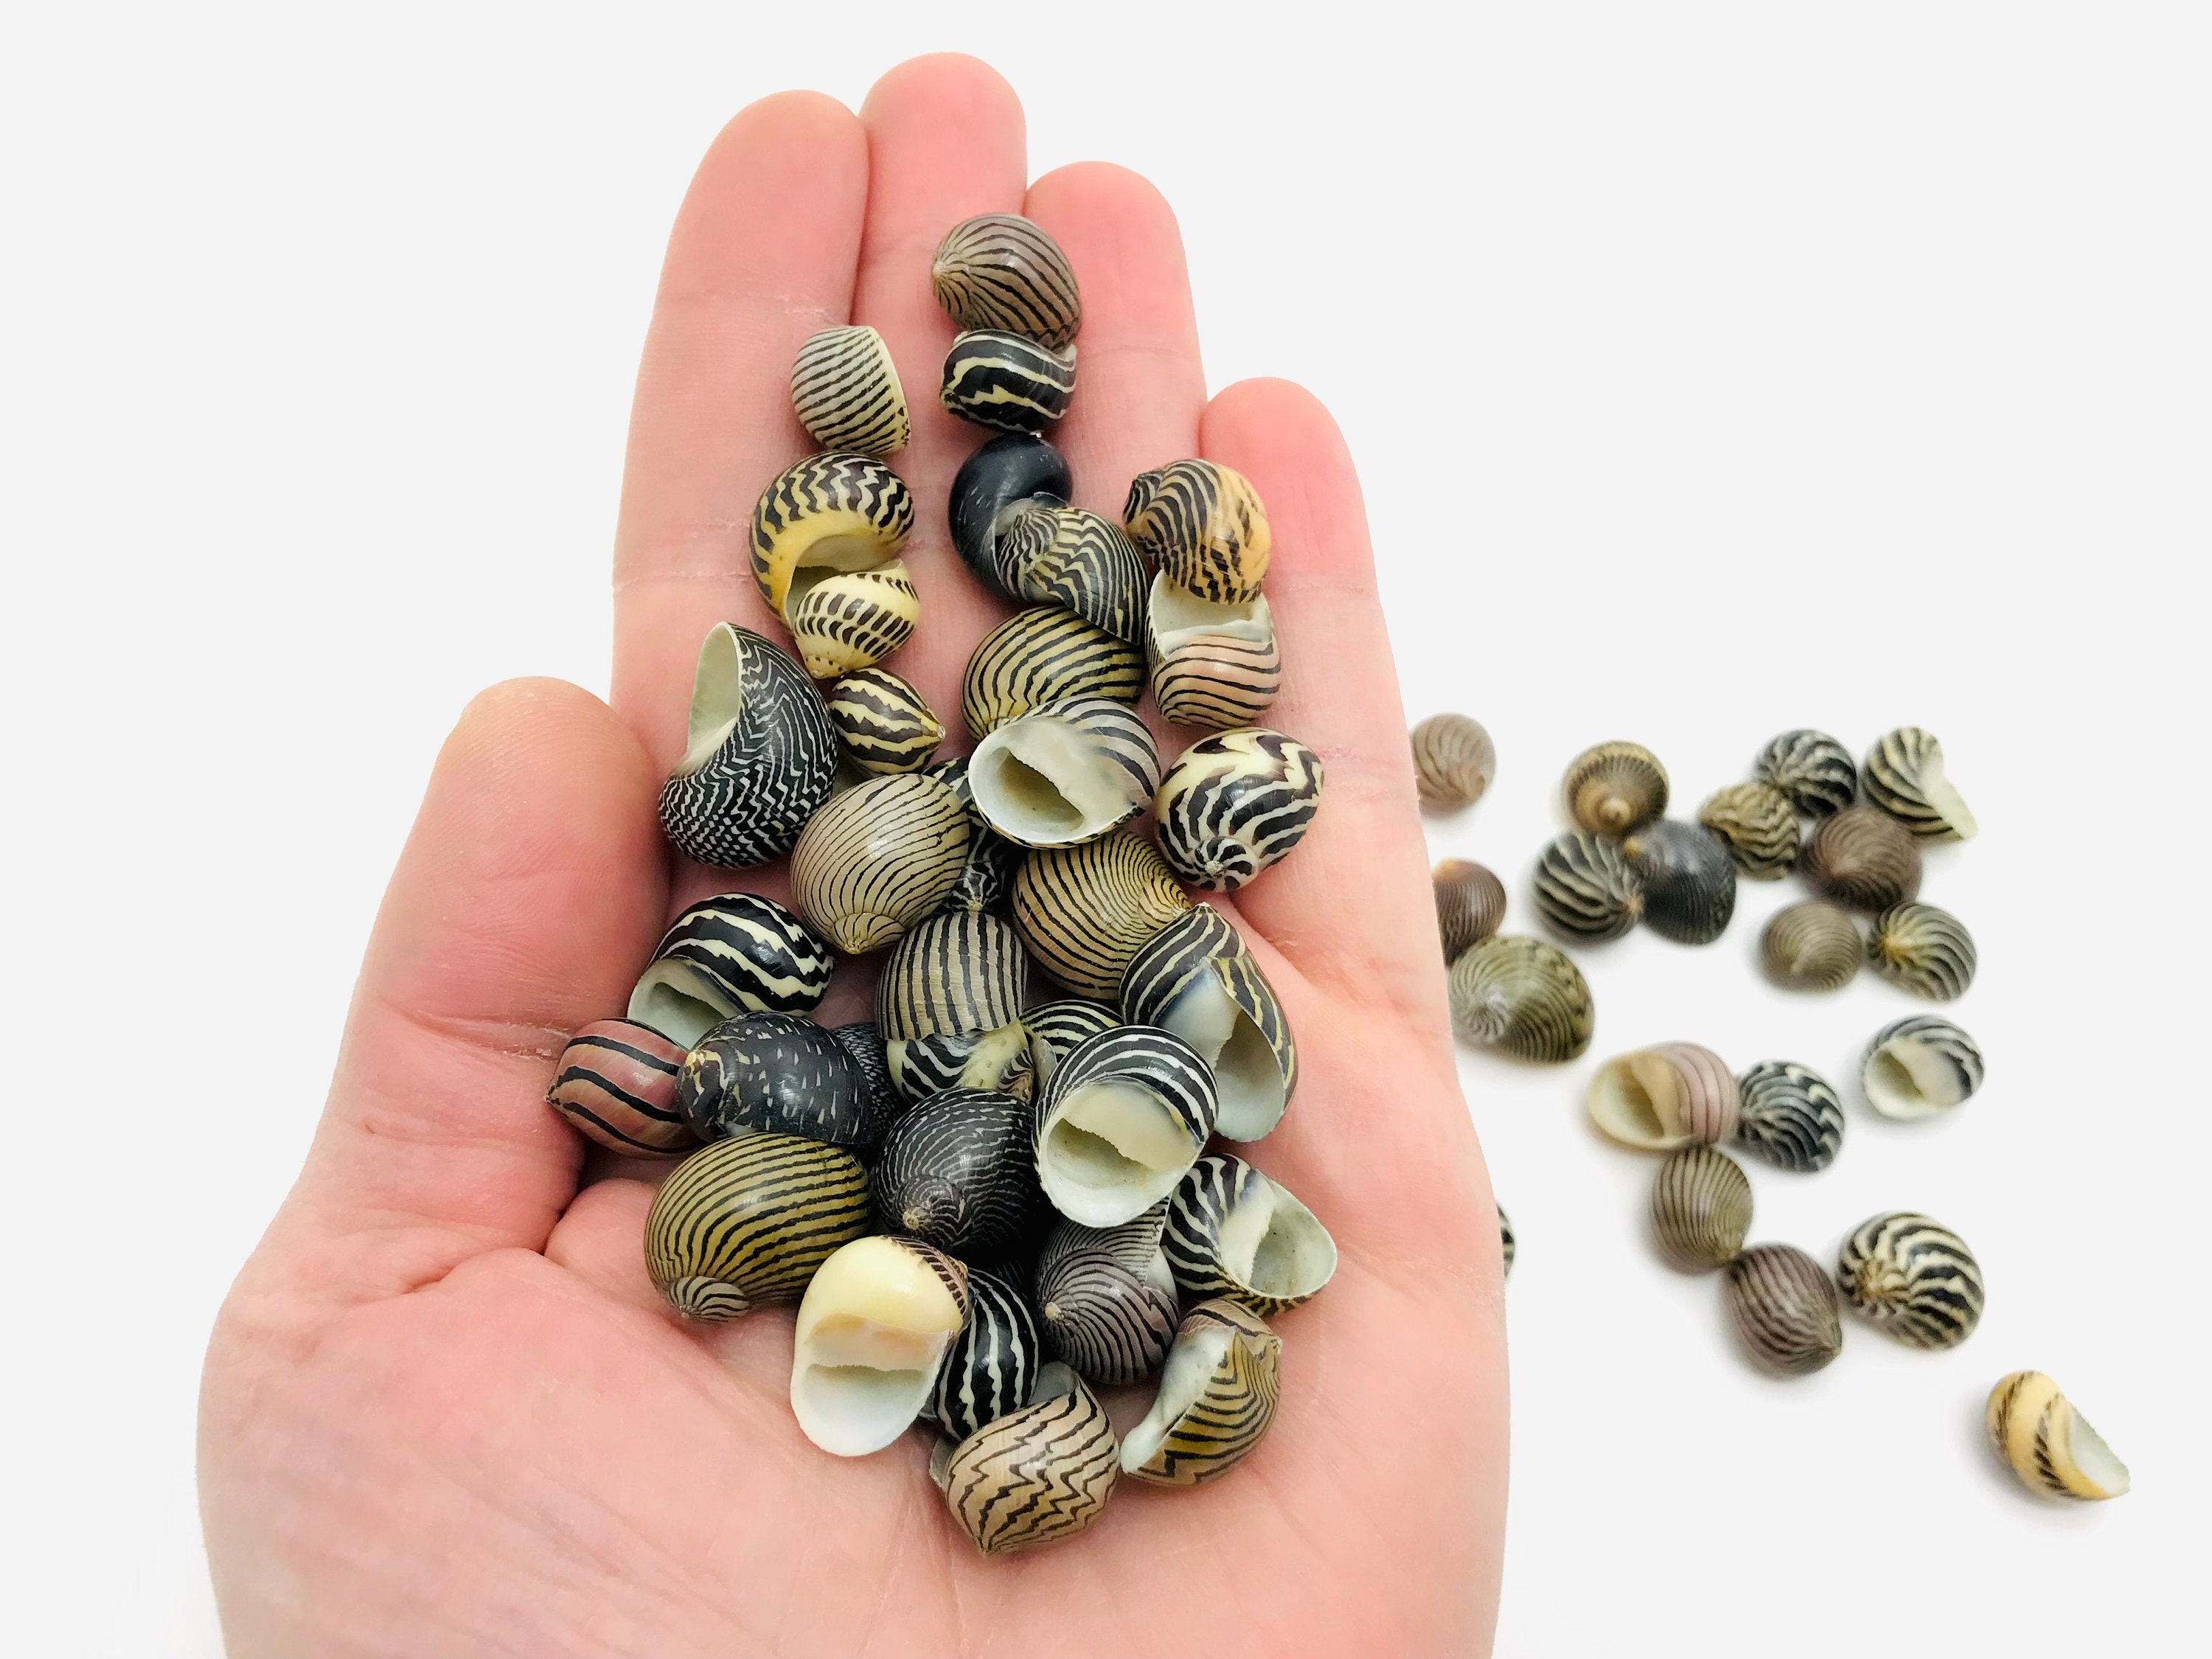 Small Striped Shells, Neritina, Curiosity Cabinet, Collectible Shell, Zebra  Shells for Creative Leisure, Nerite Shell - Etsy